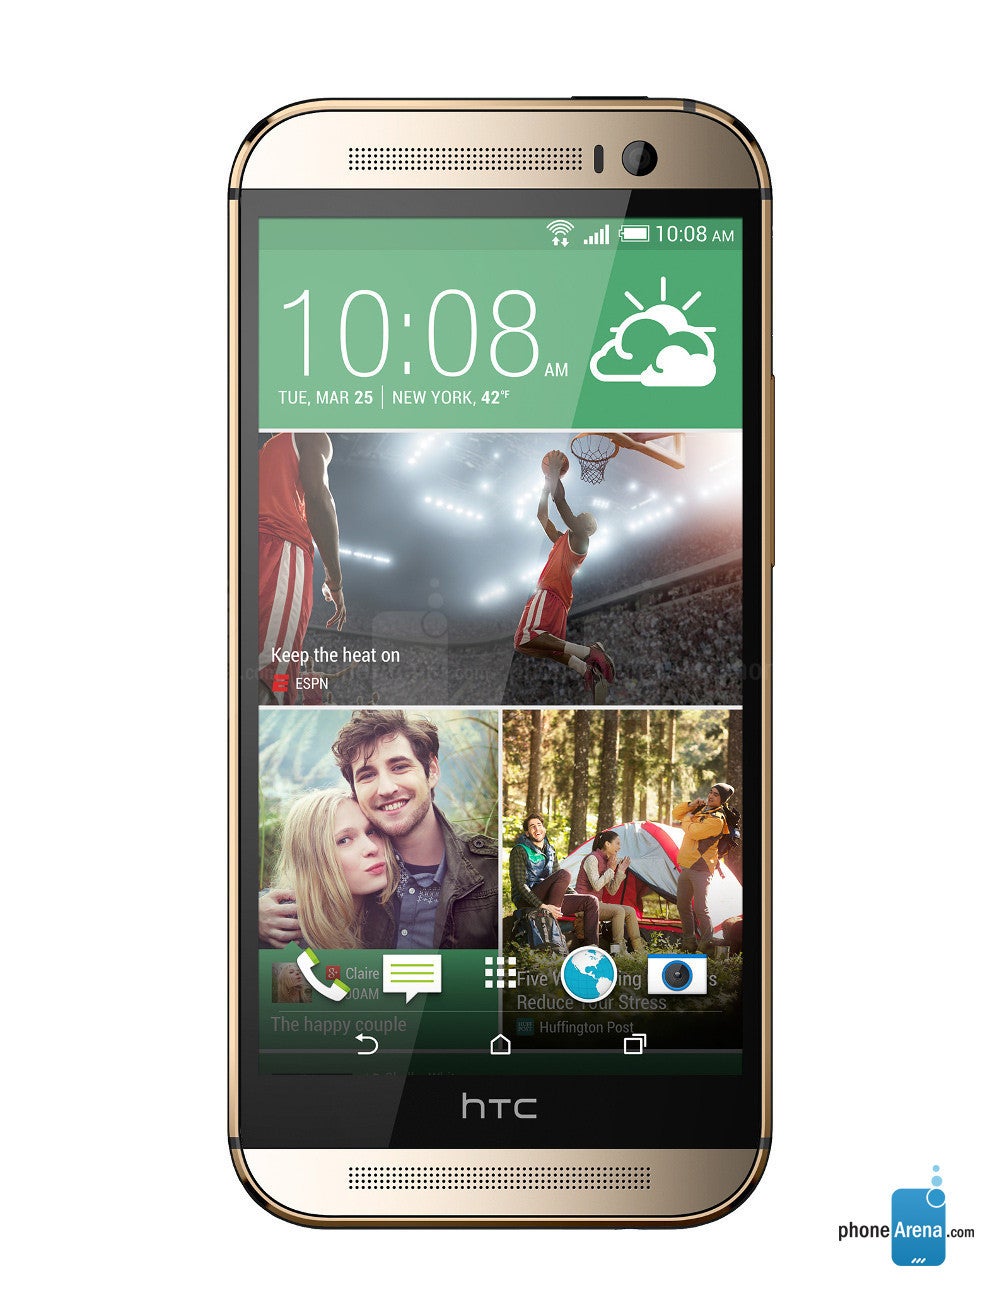 HTC One M8, curing shareholder anxiety since 2014 - Thousands of HTC investors show up expecting free phones, get motivational speeches and some bread instead